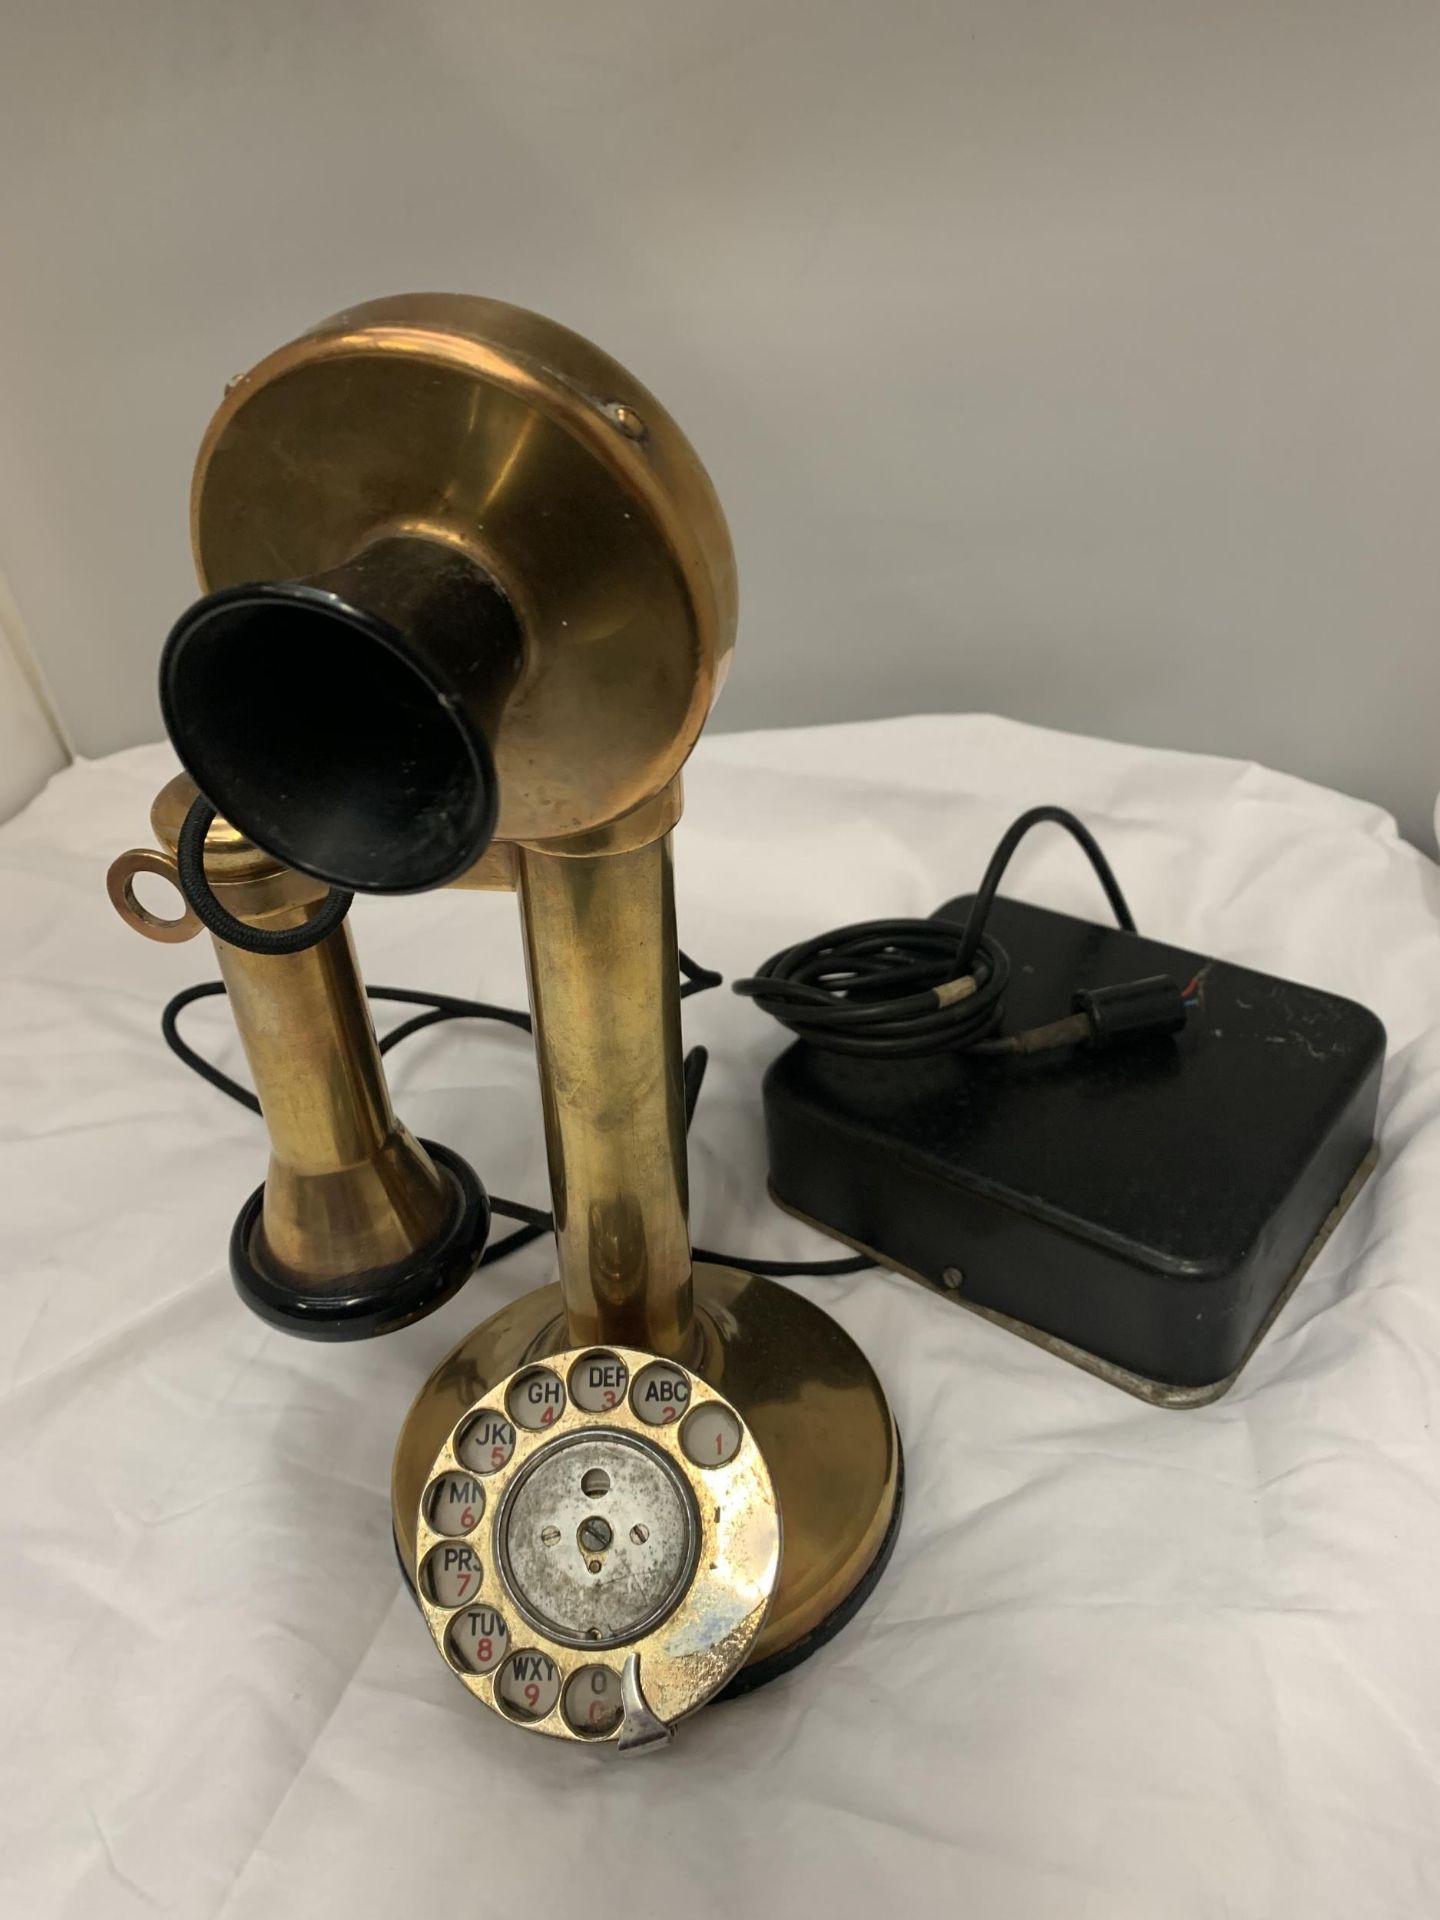 A BRASS 'CANDLESTICK' ROTARY DIAL TELEPHONE WITH EAR PIECE AND BOX